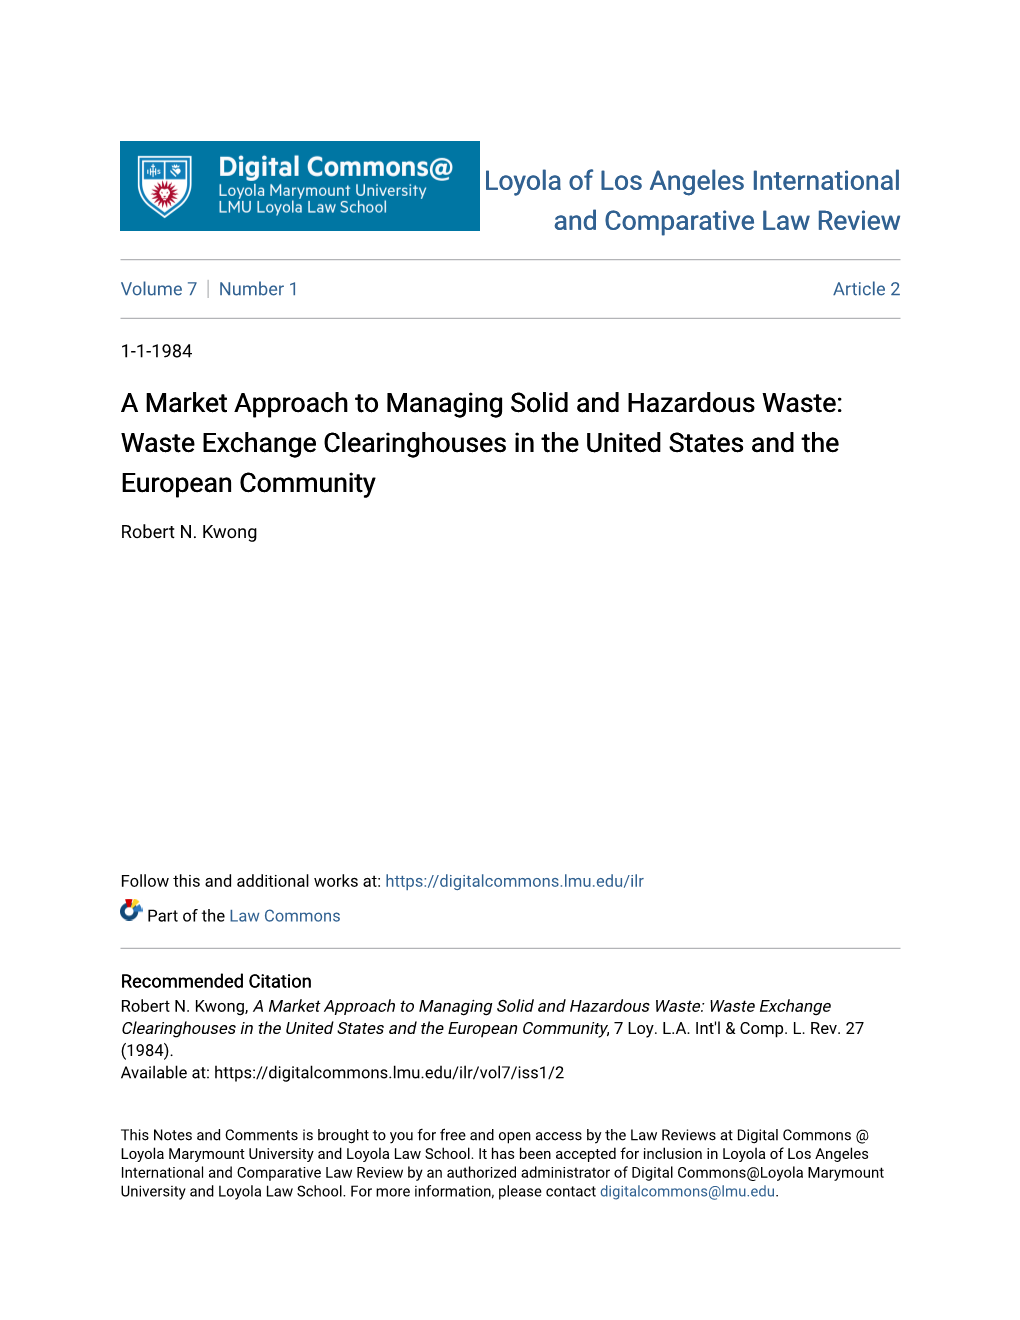 A Market Approach to Managing Solid and Hazardous Waste: Waste Exchange Clearinghouses in the United States and the European Community